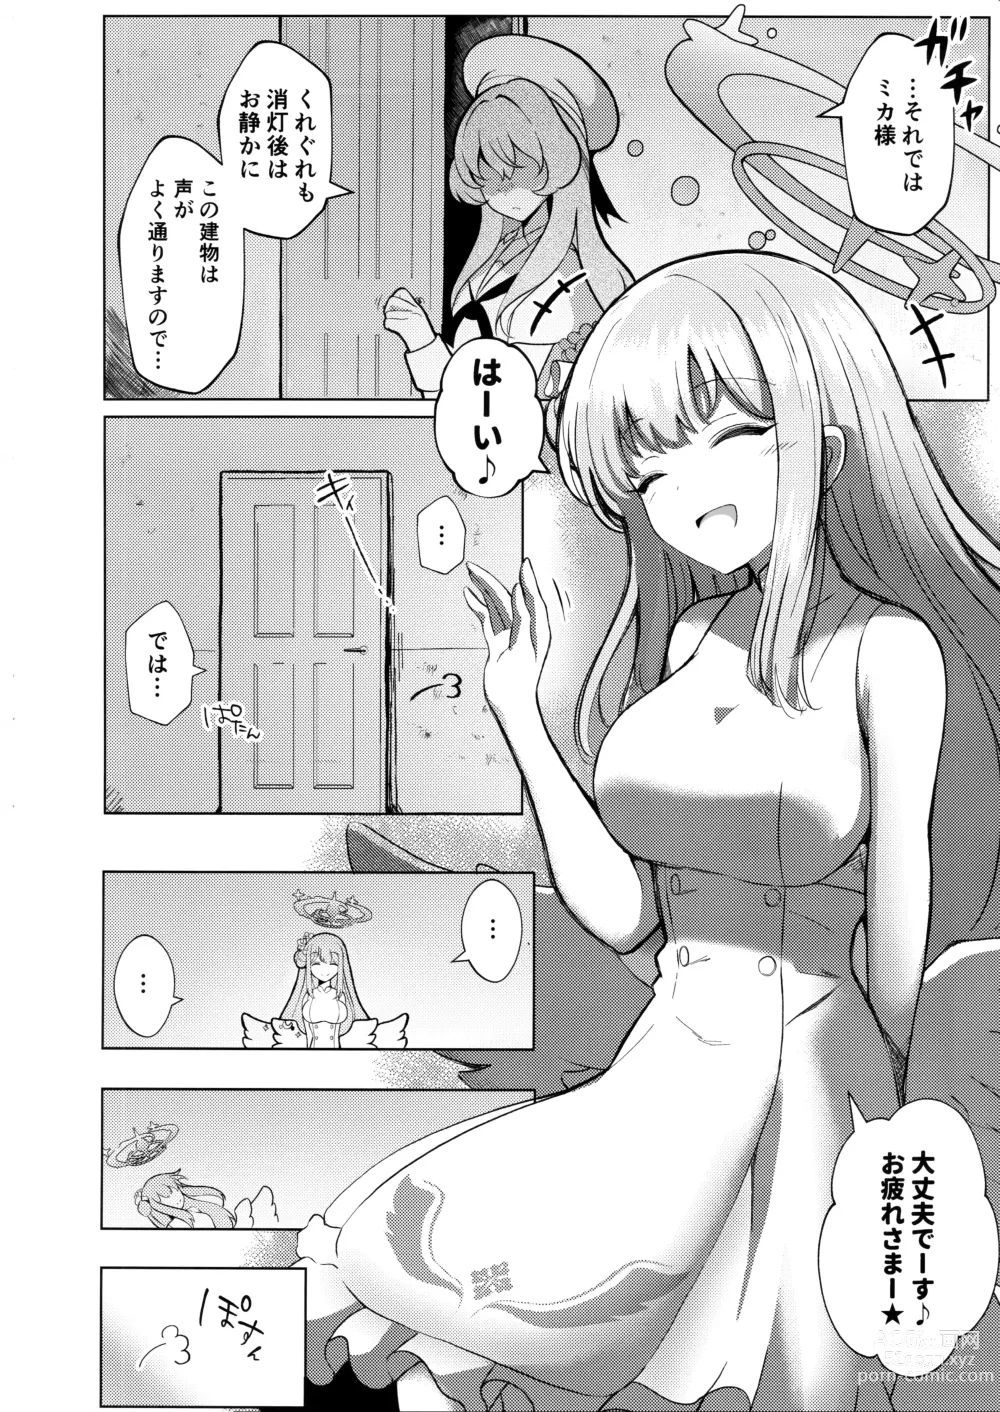 Page 3 of doujinshi Himegoto Archive